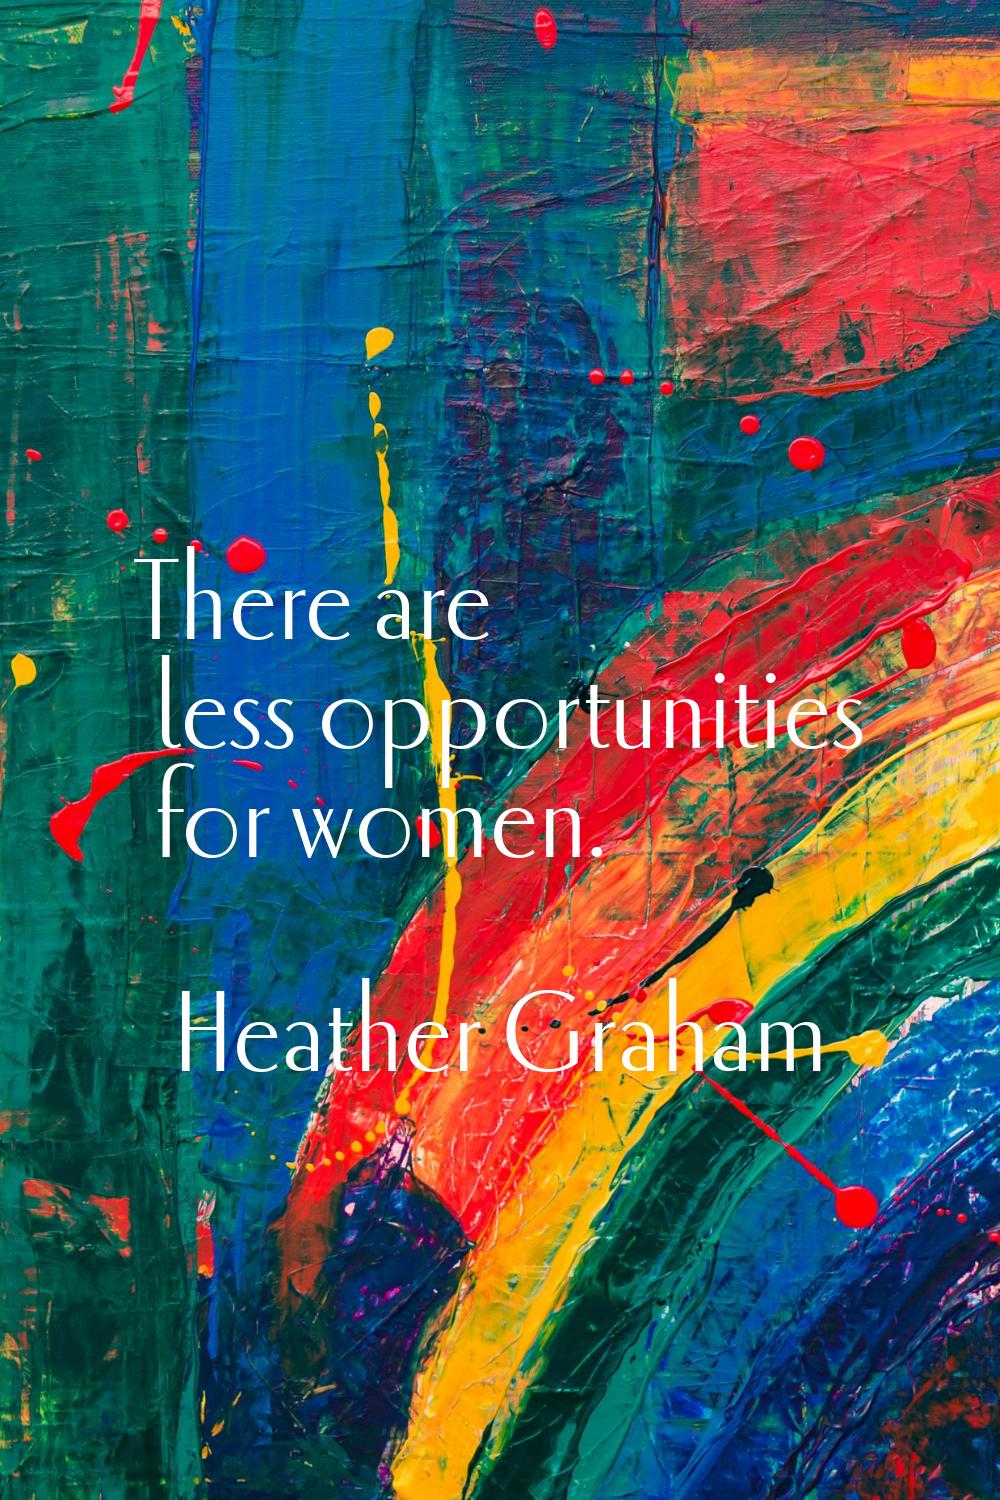 There are less opportunities for women.